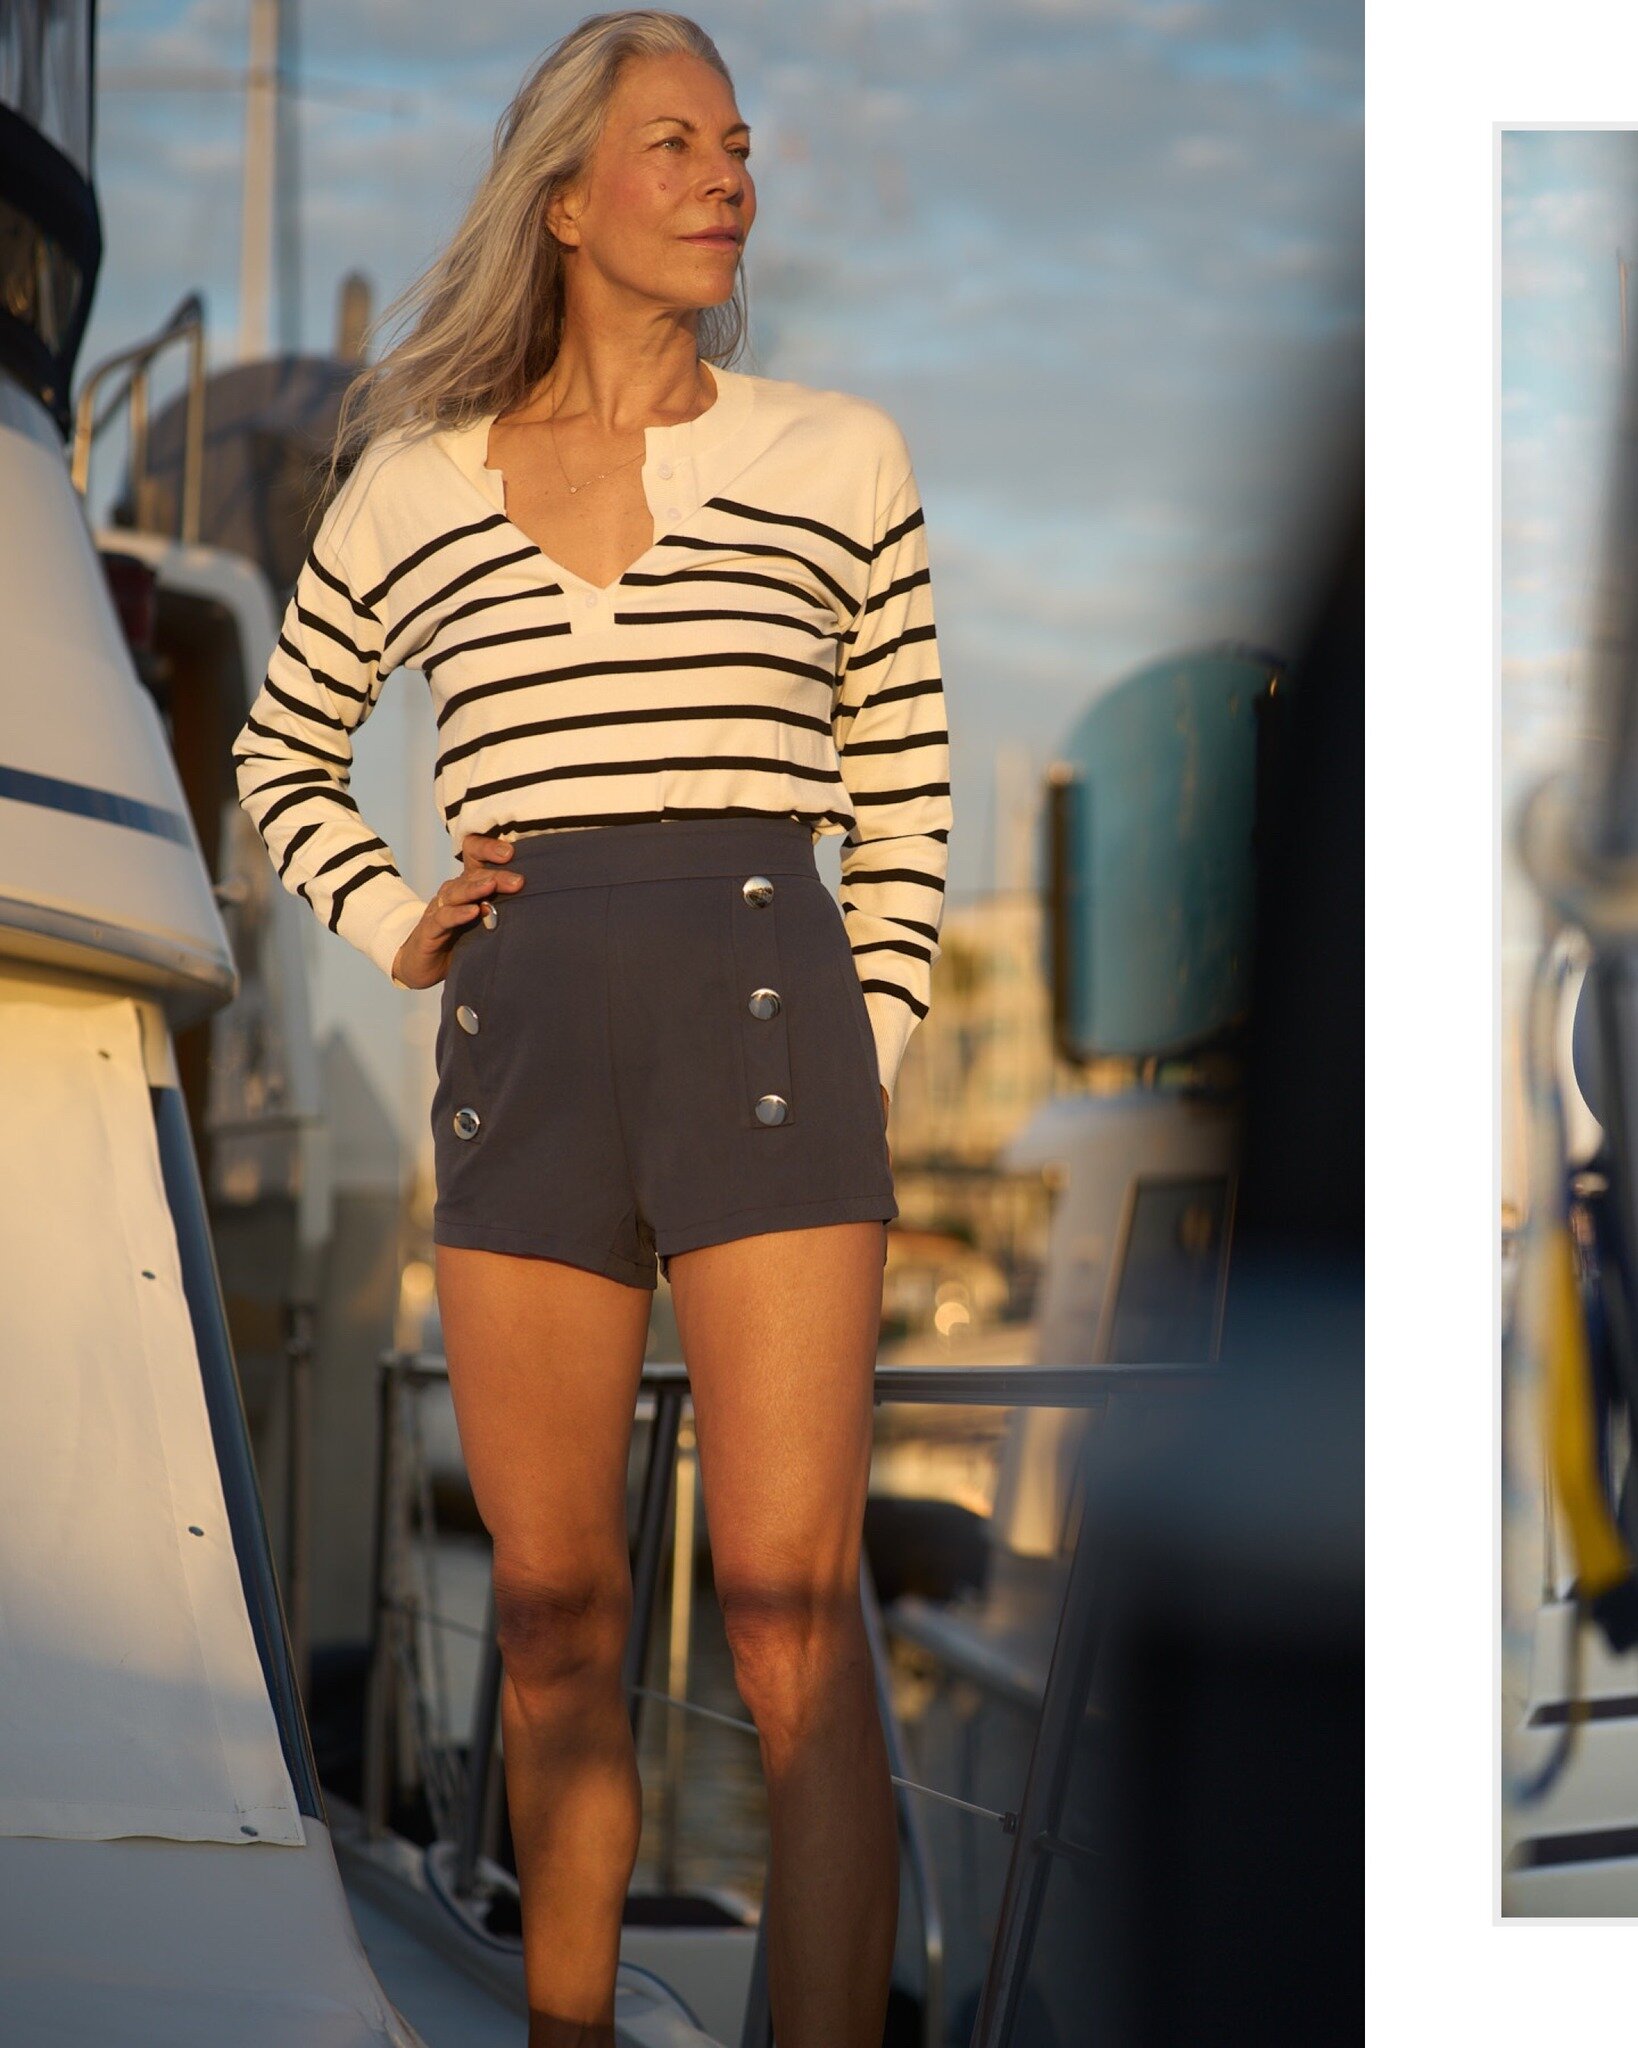 A little bit more summer sun before autumn grabs us ... 

#fashionphotography #boatlife #classicmodels